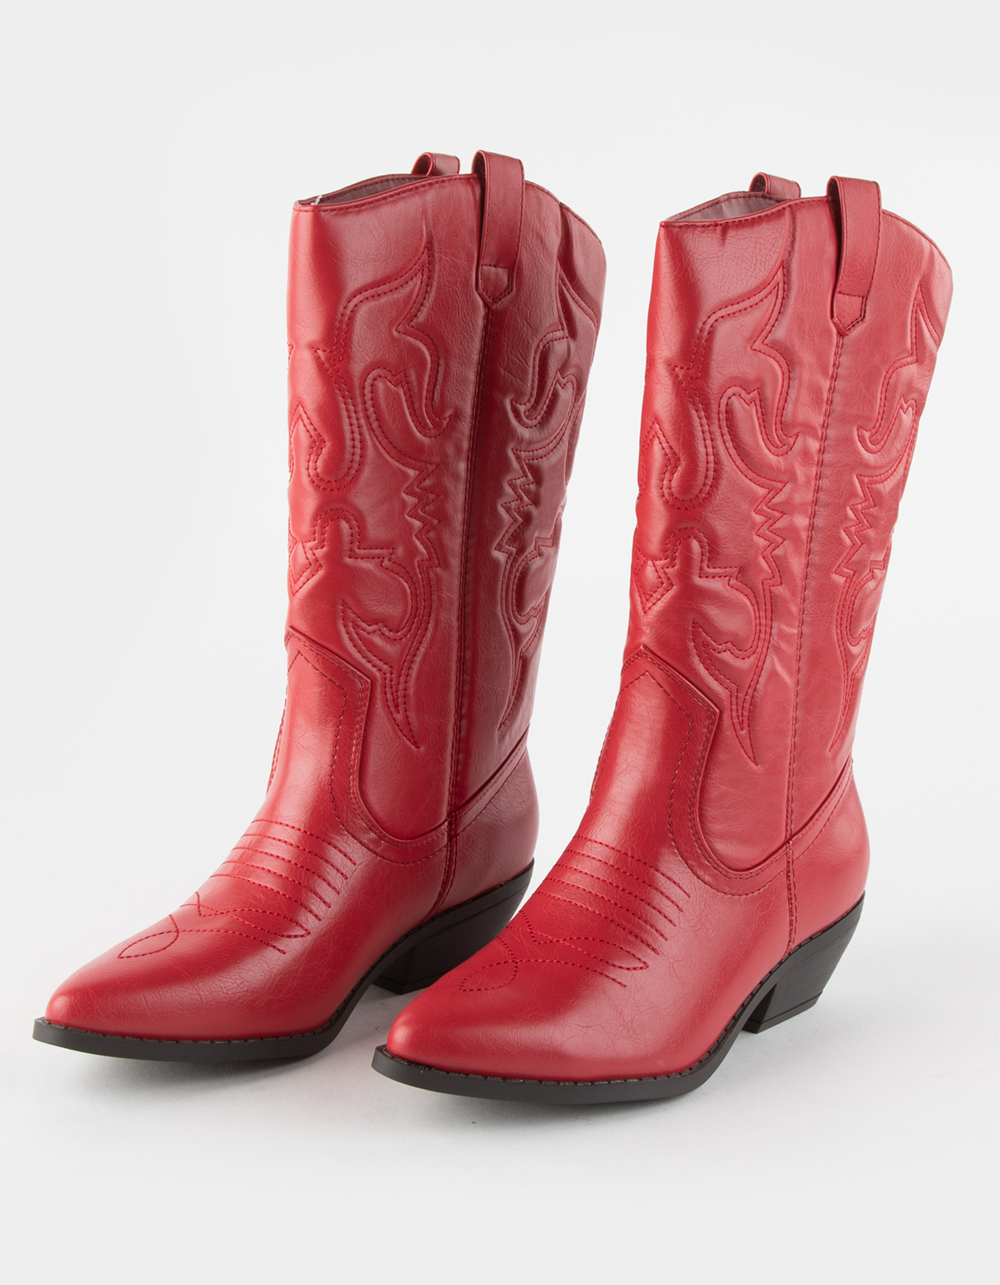 Women's Western Boots With Red Bottom Size 6.5 for Sale in Phoenix, AZ -  OfferUp